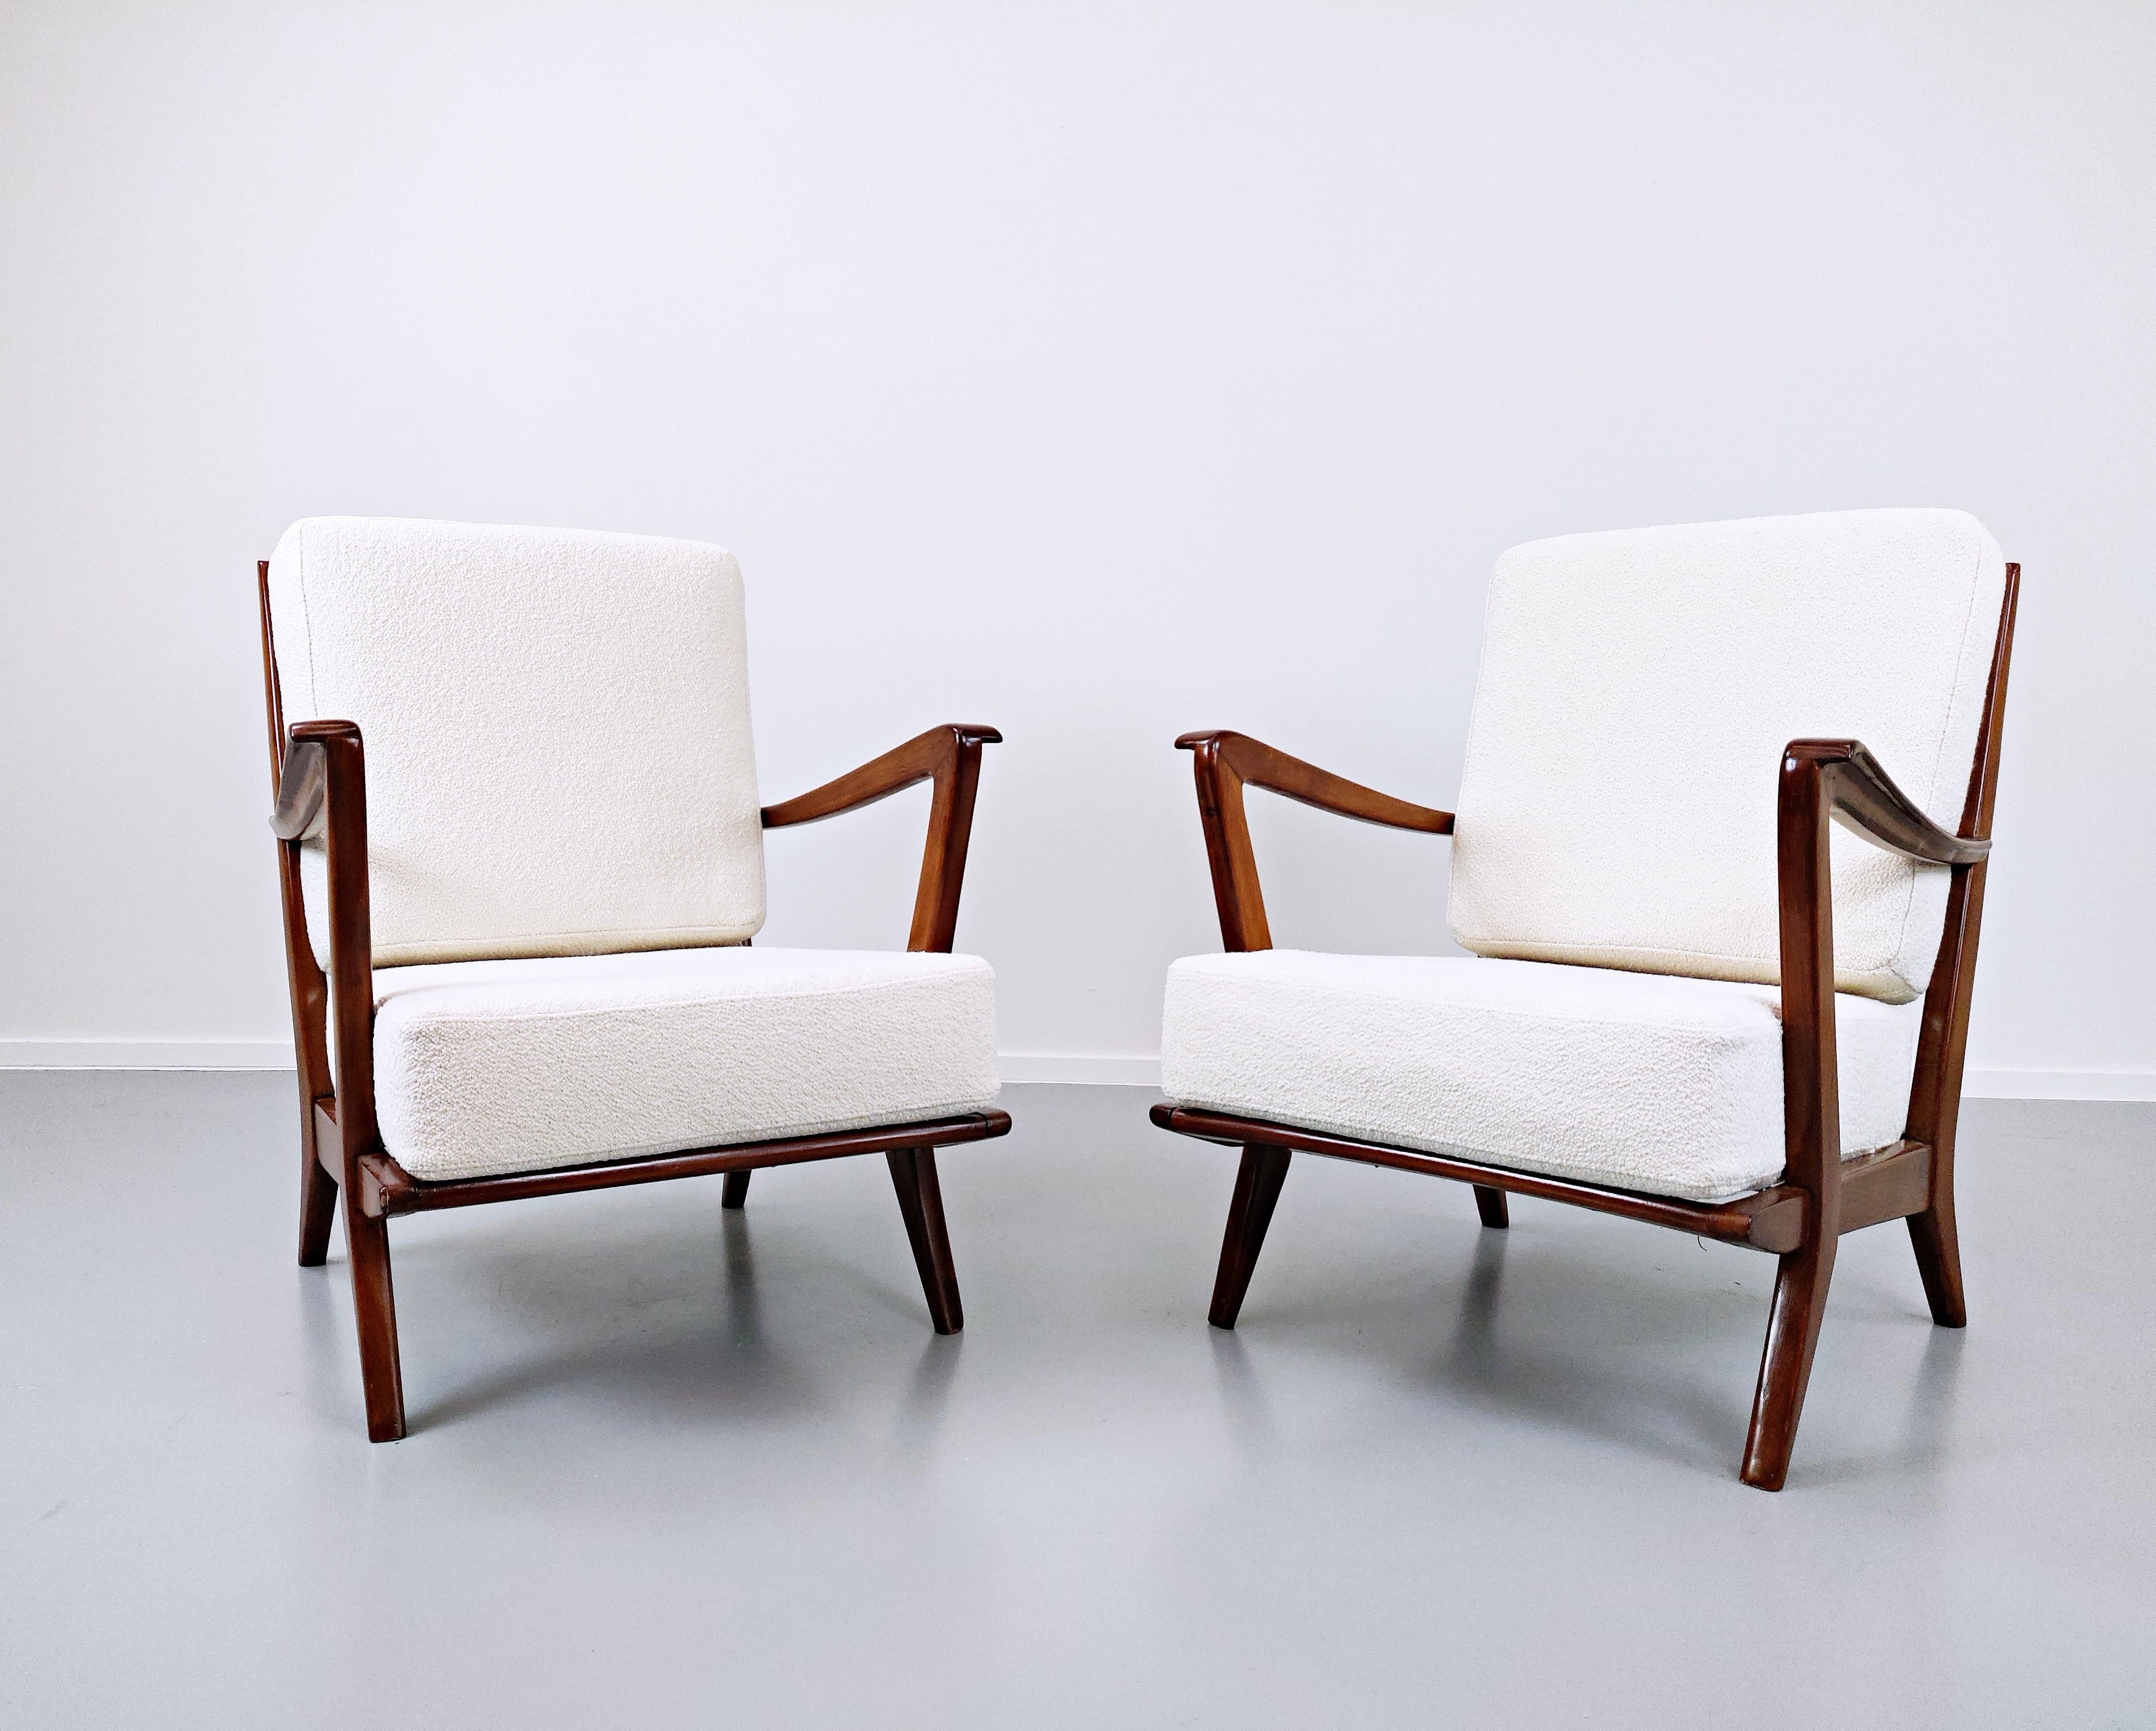 Italian Pair of Mid-Century Modern Armchairs Model 516 by Gio Ponti for Cassina, 1950s